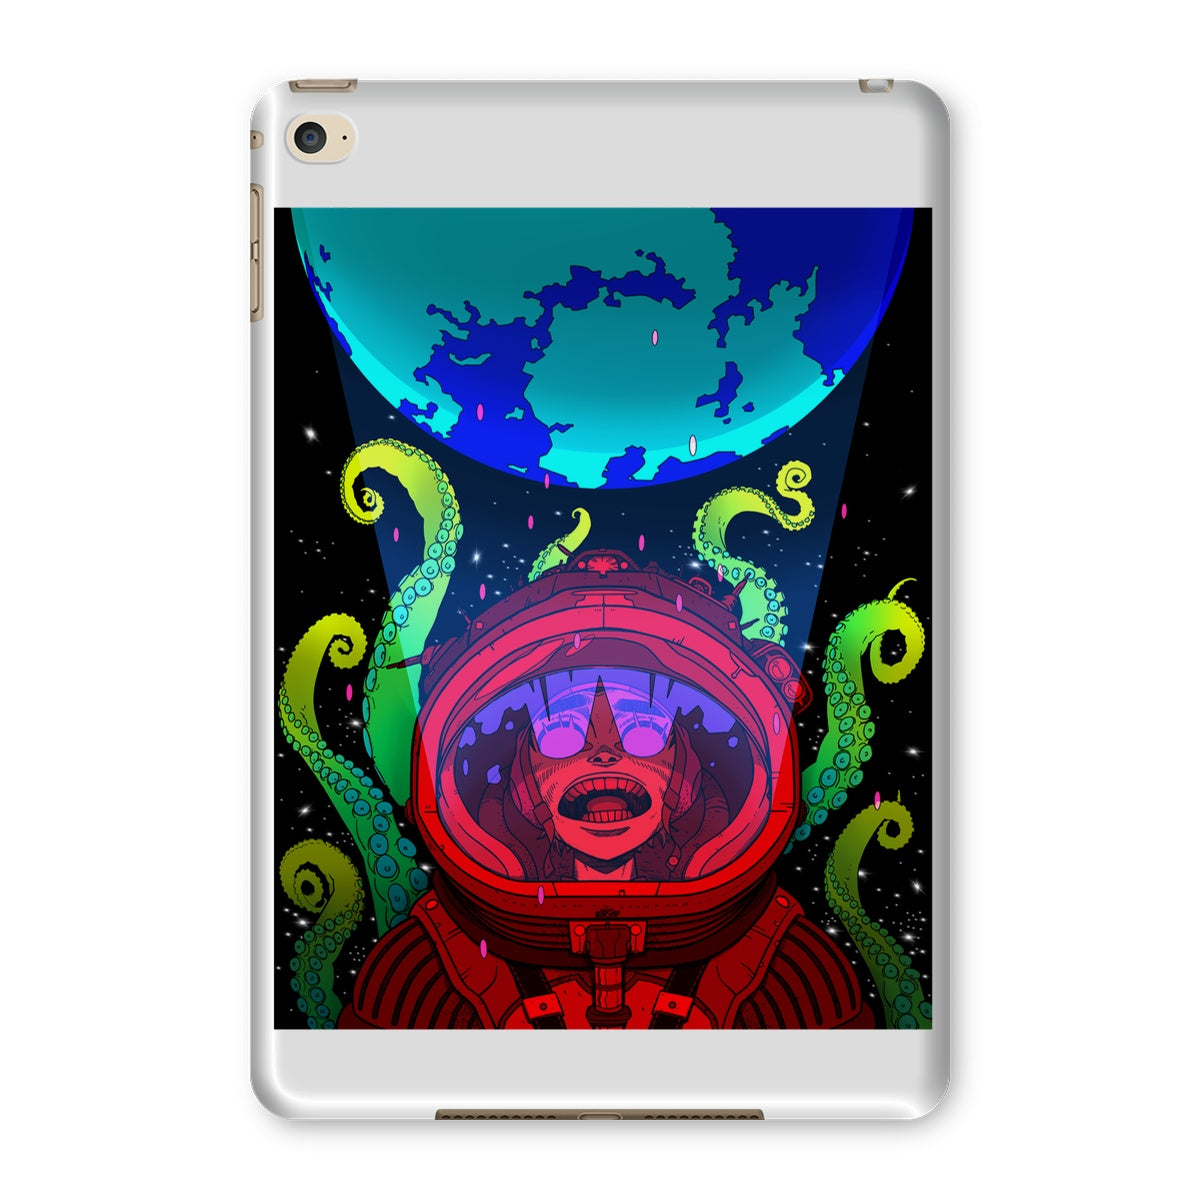 Cthulhu Chaos Tablet Case